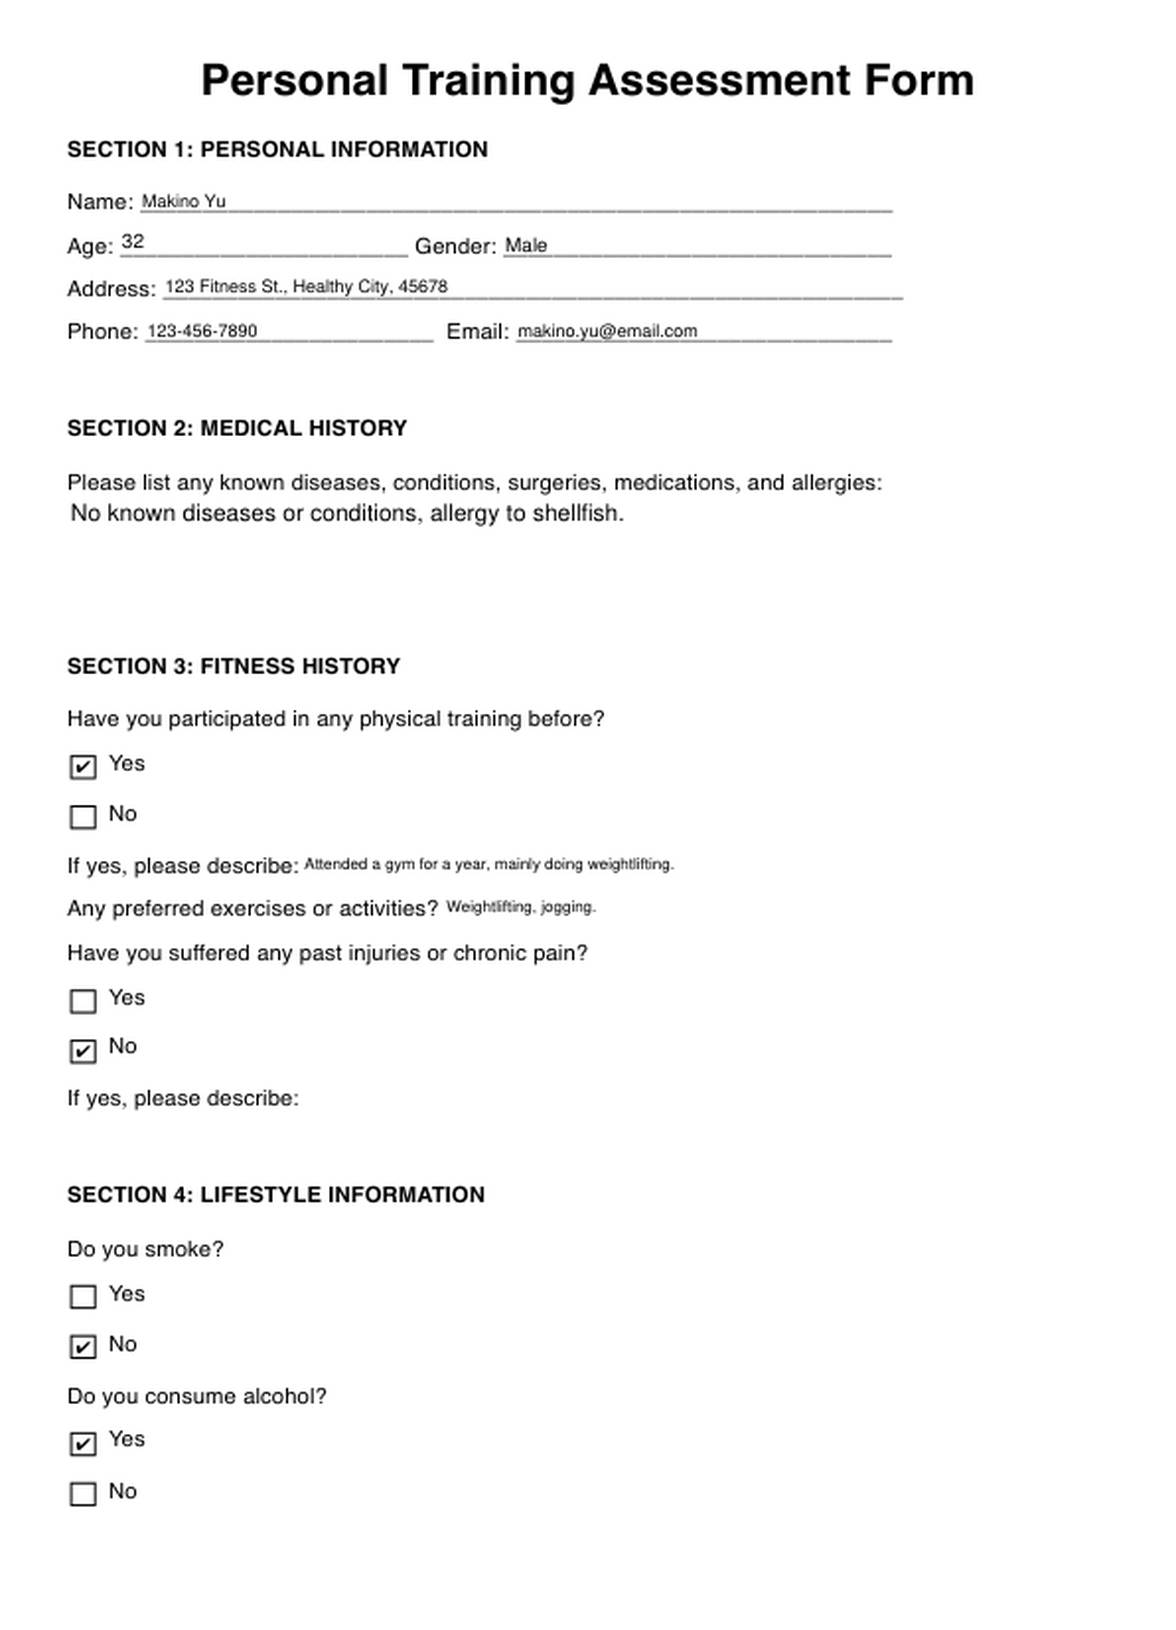 Personal Training Assessment Forms PDF Example